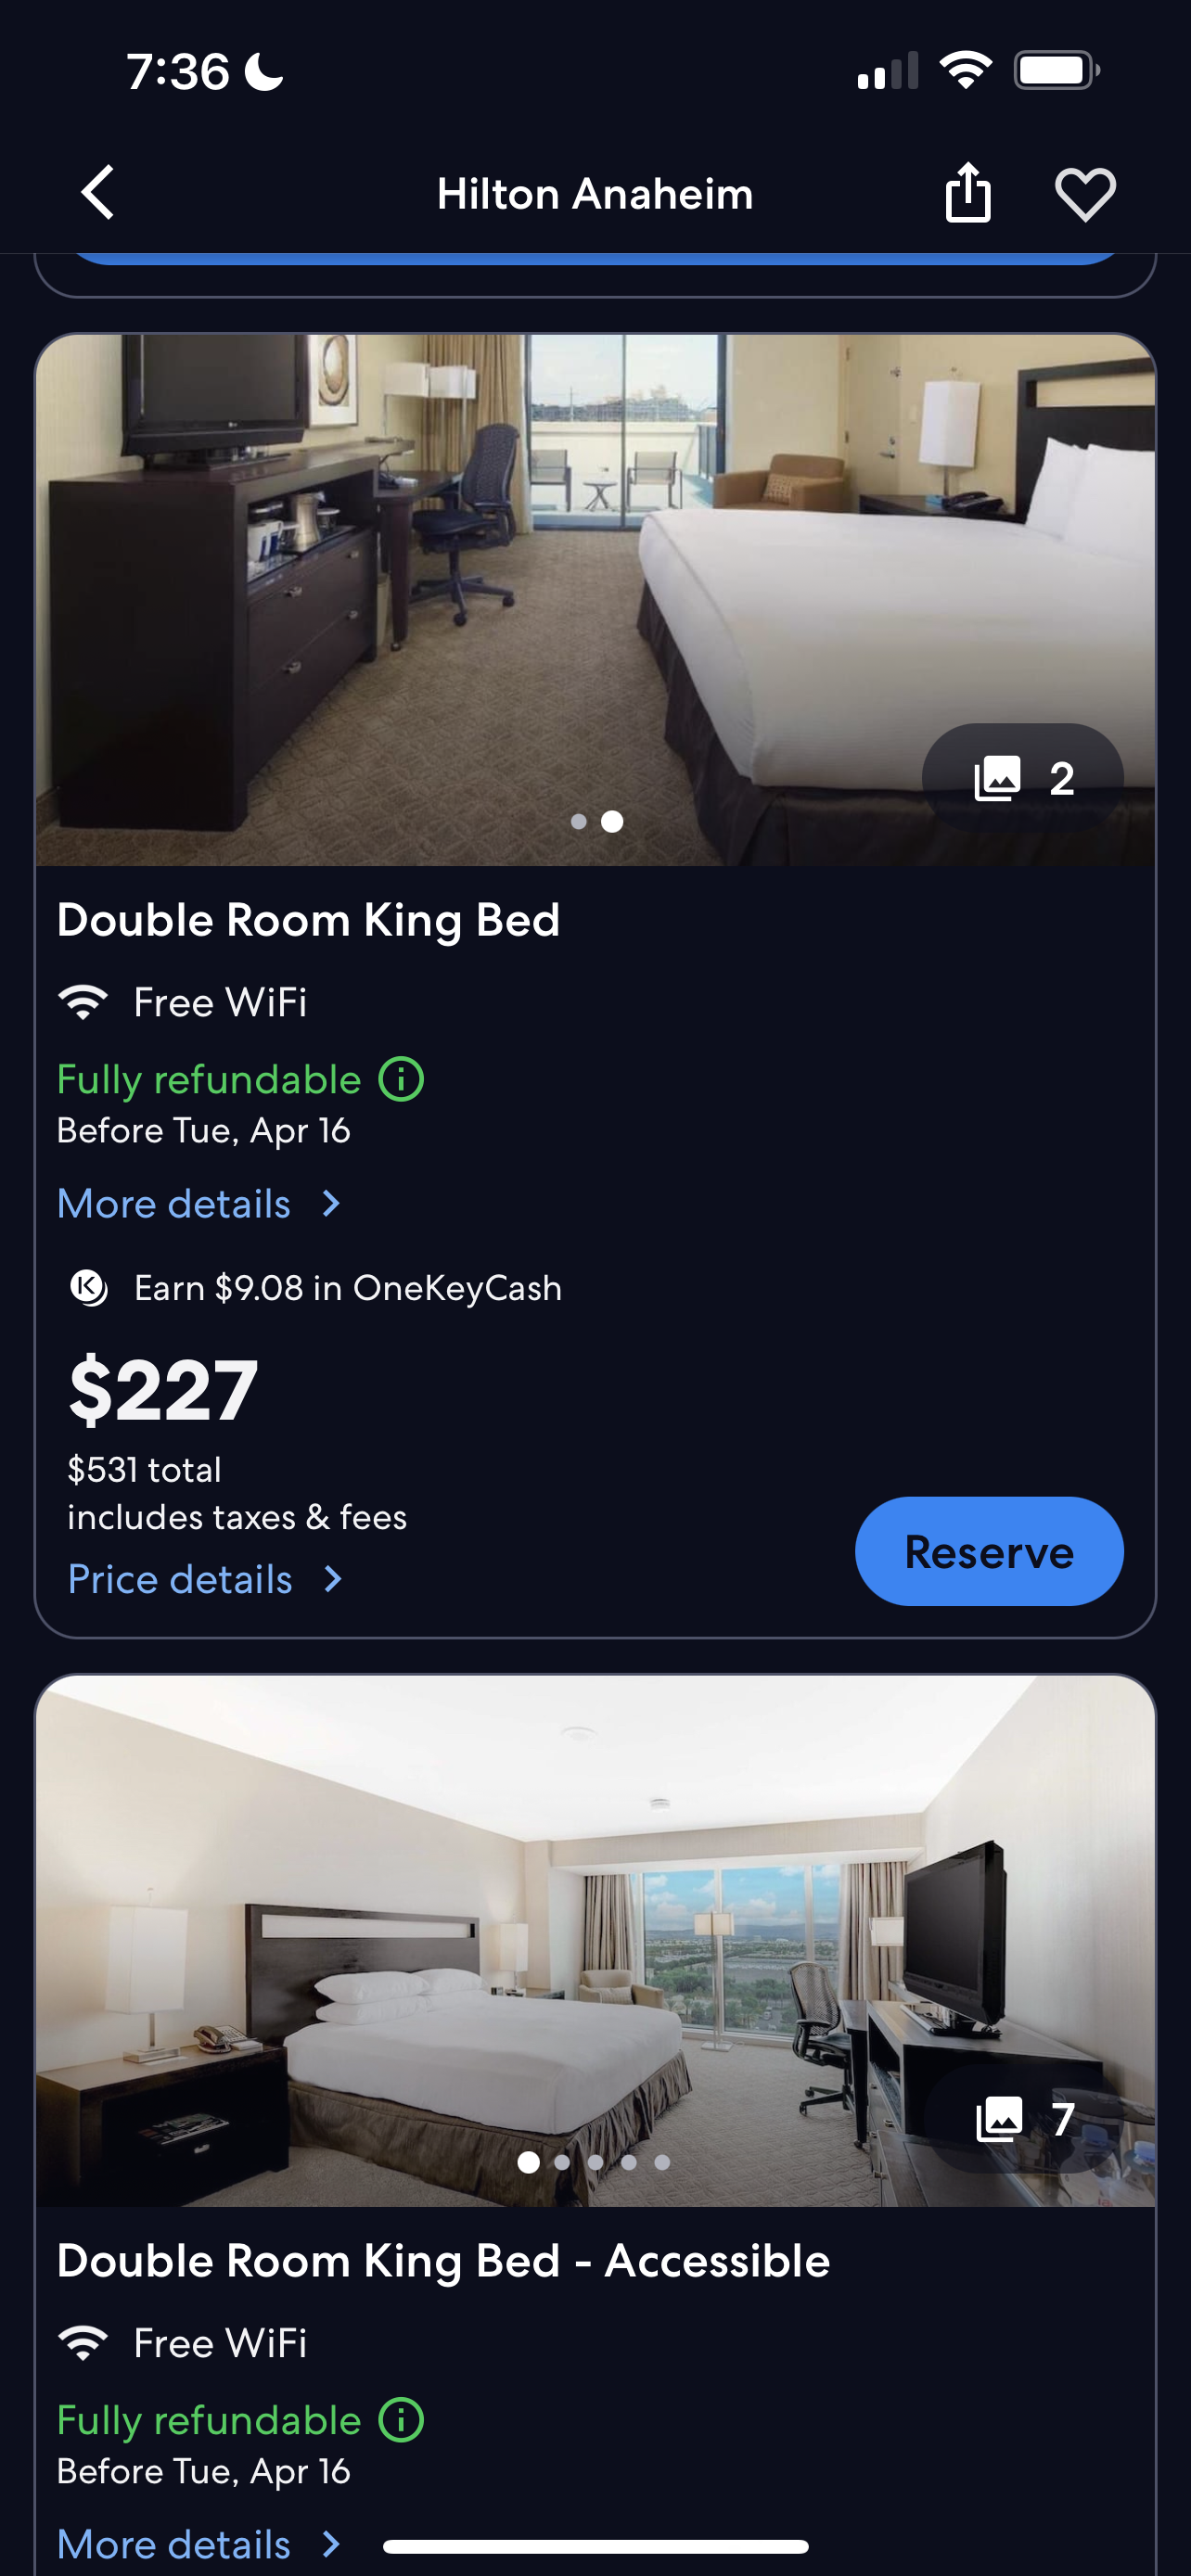 Proof, they advertised falsely a double king room